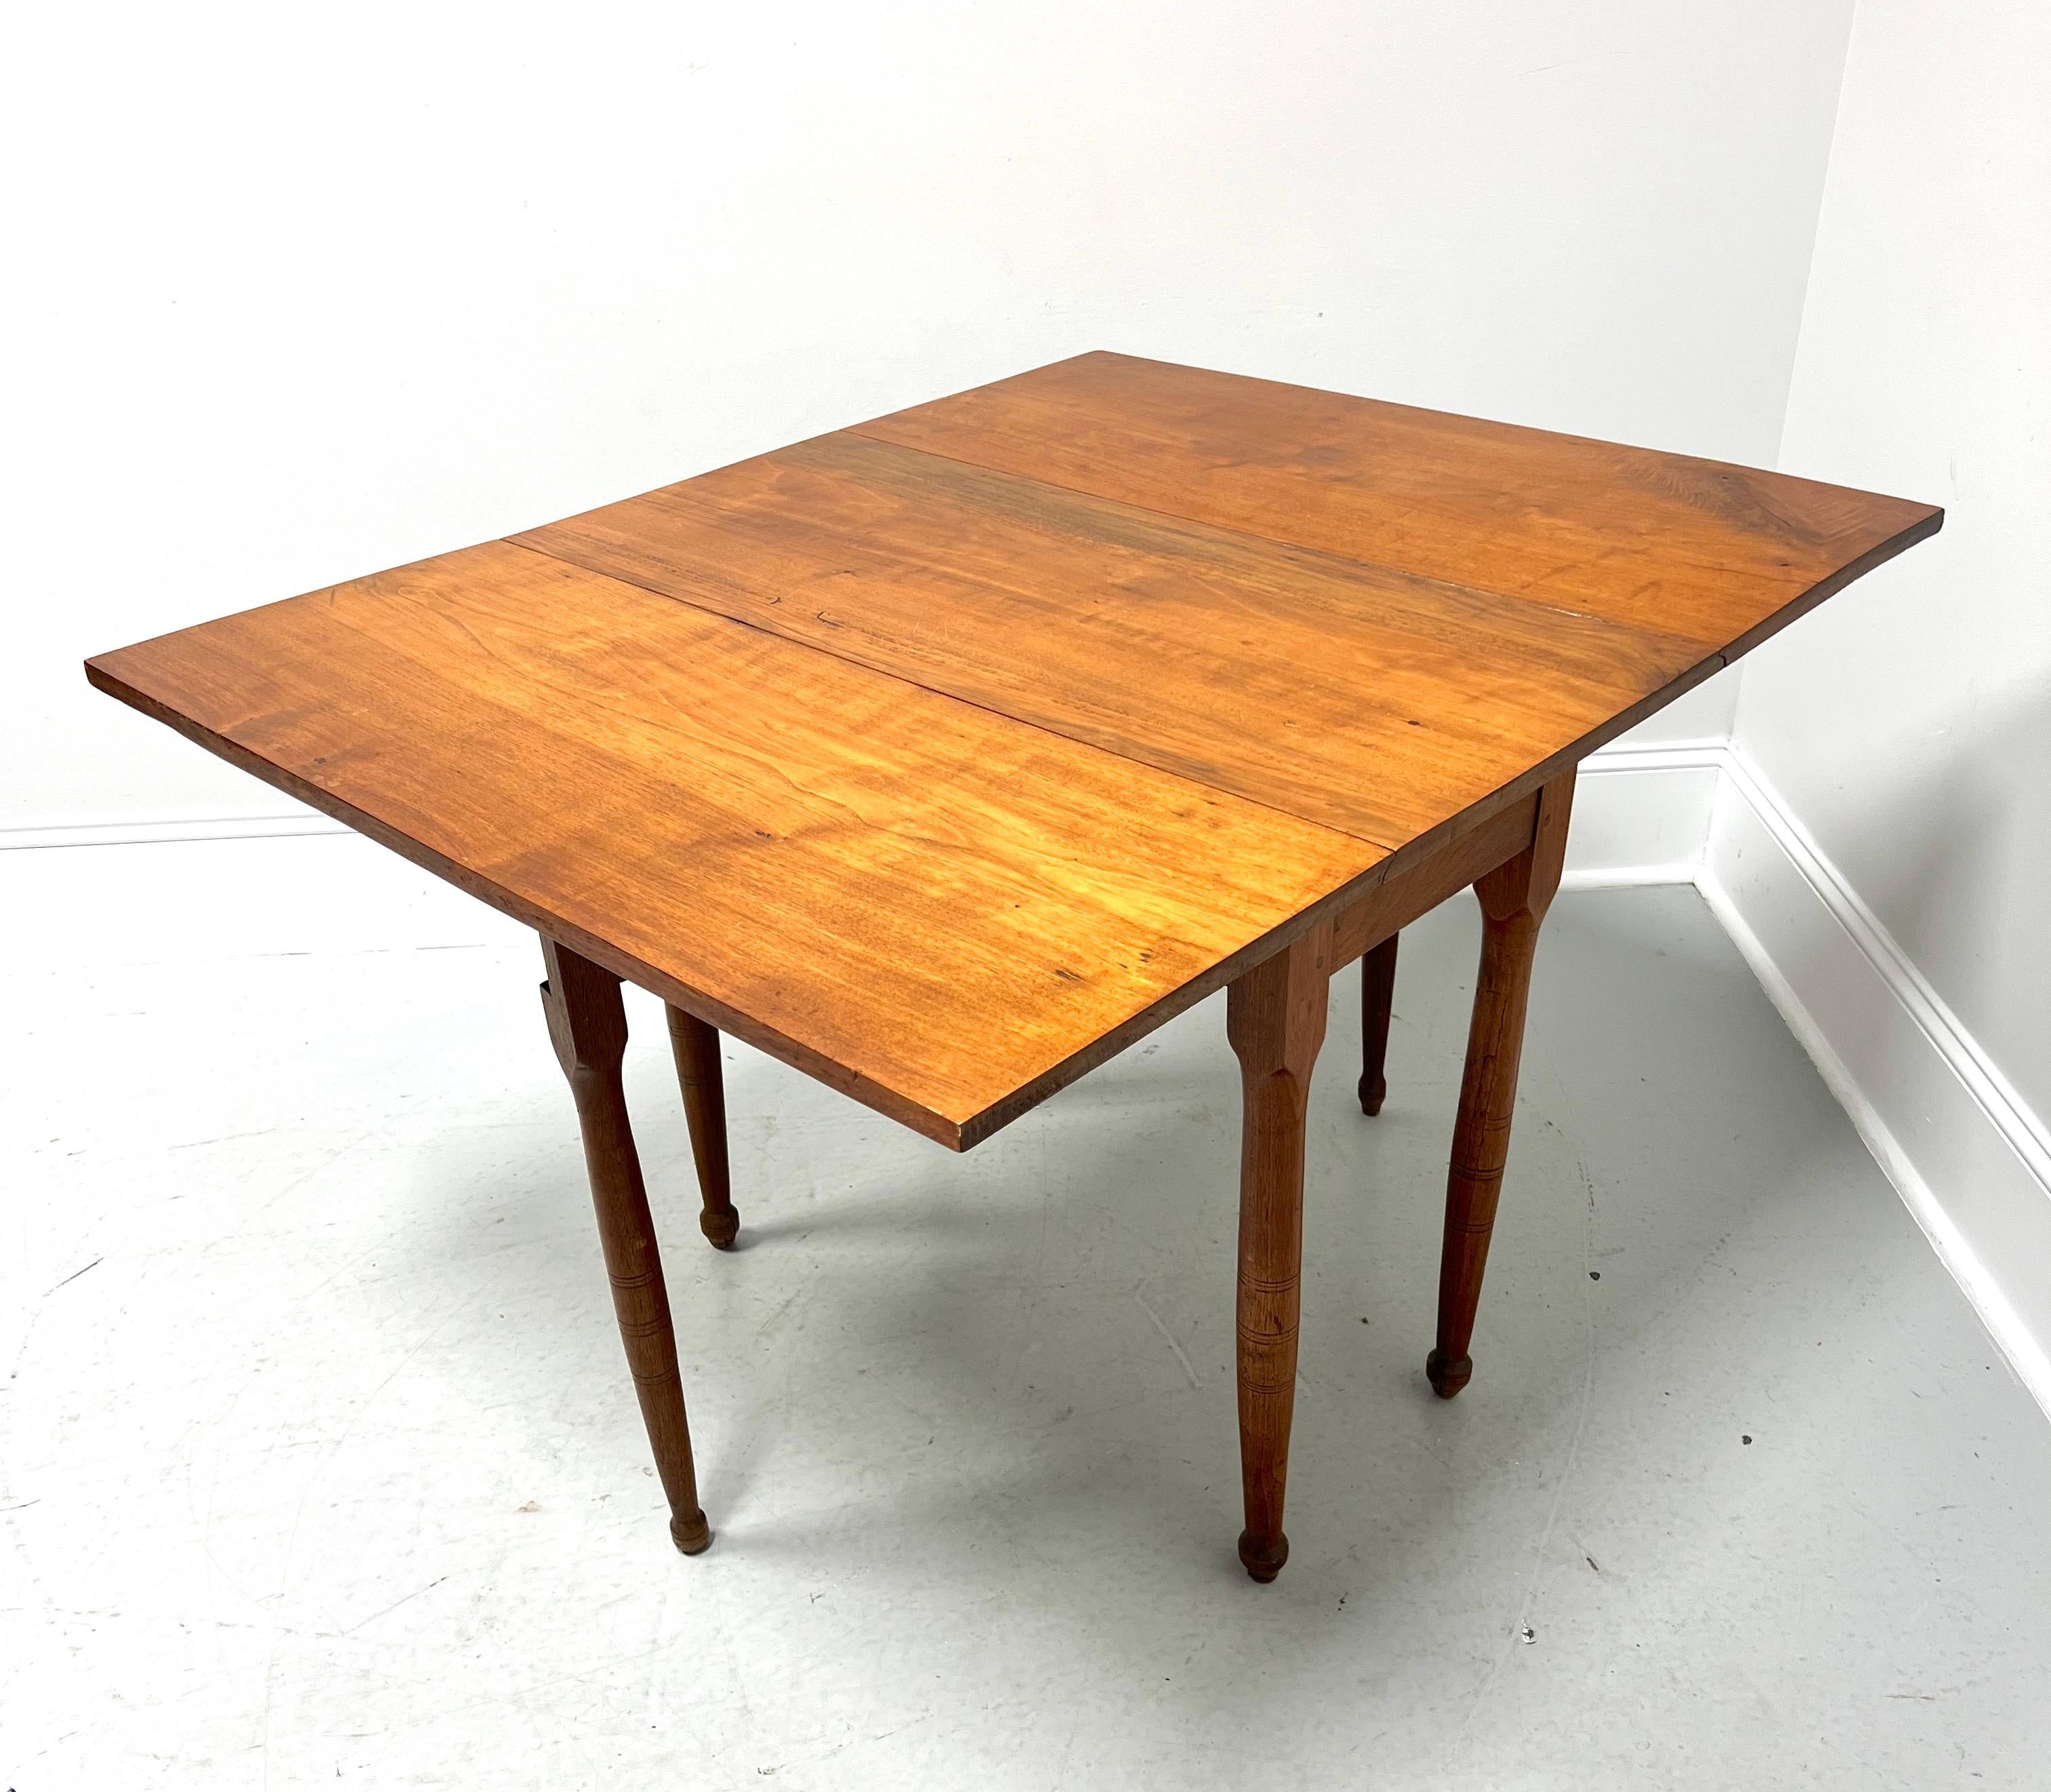 An antique 19th Century Colonial style gateleg drop-leaf dining table, unbranded. Solid walnut, a center apron, and six round tapered straight legs, two being gateleg that swing out to support the drop leaves when raised. Made in the USA.

Measures: